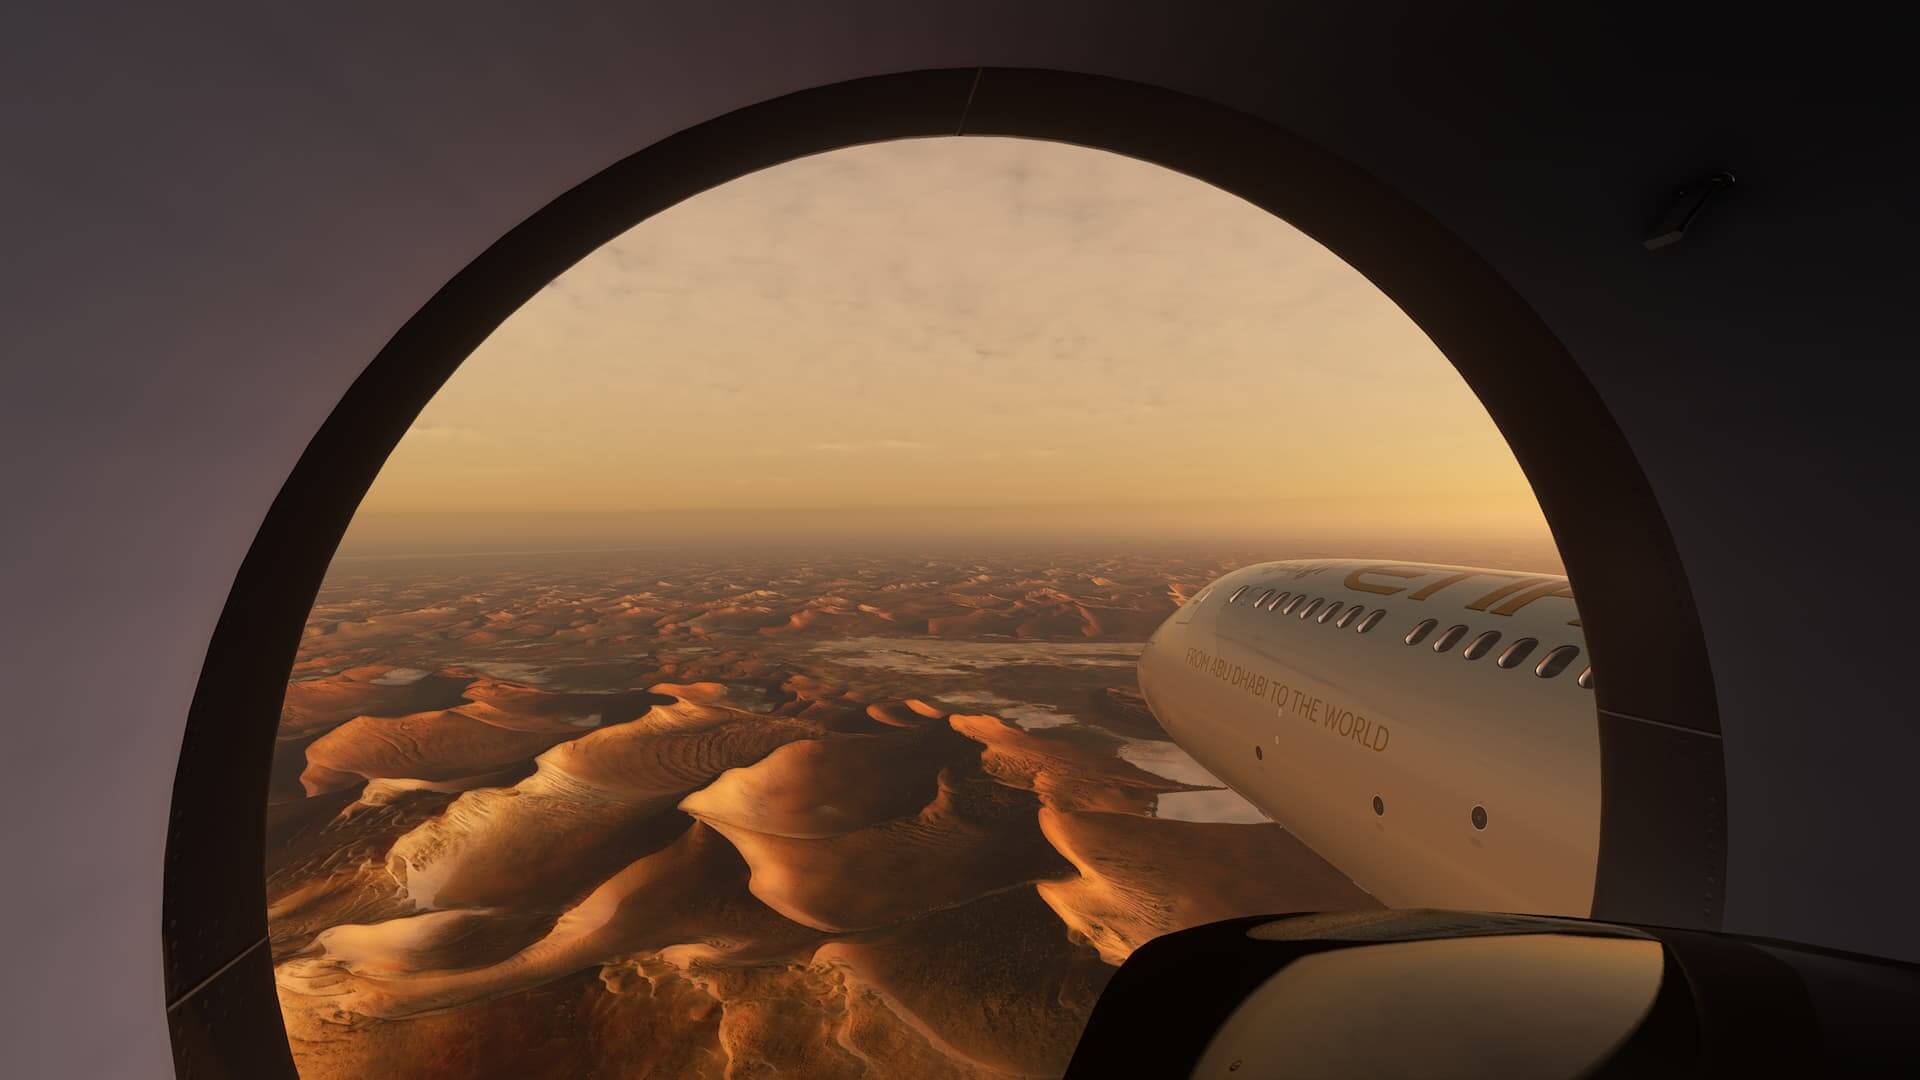 A view taken from inside the left engine of an Etihad airliner, which is banking right above the desert.